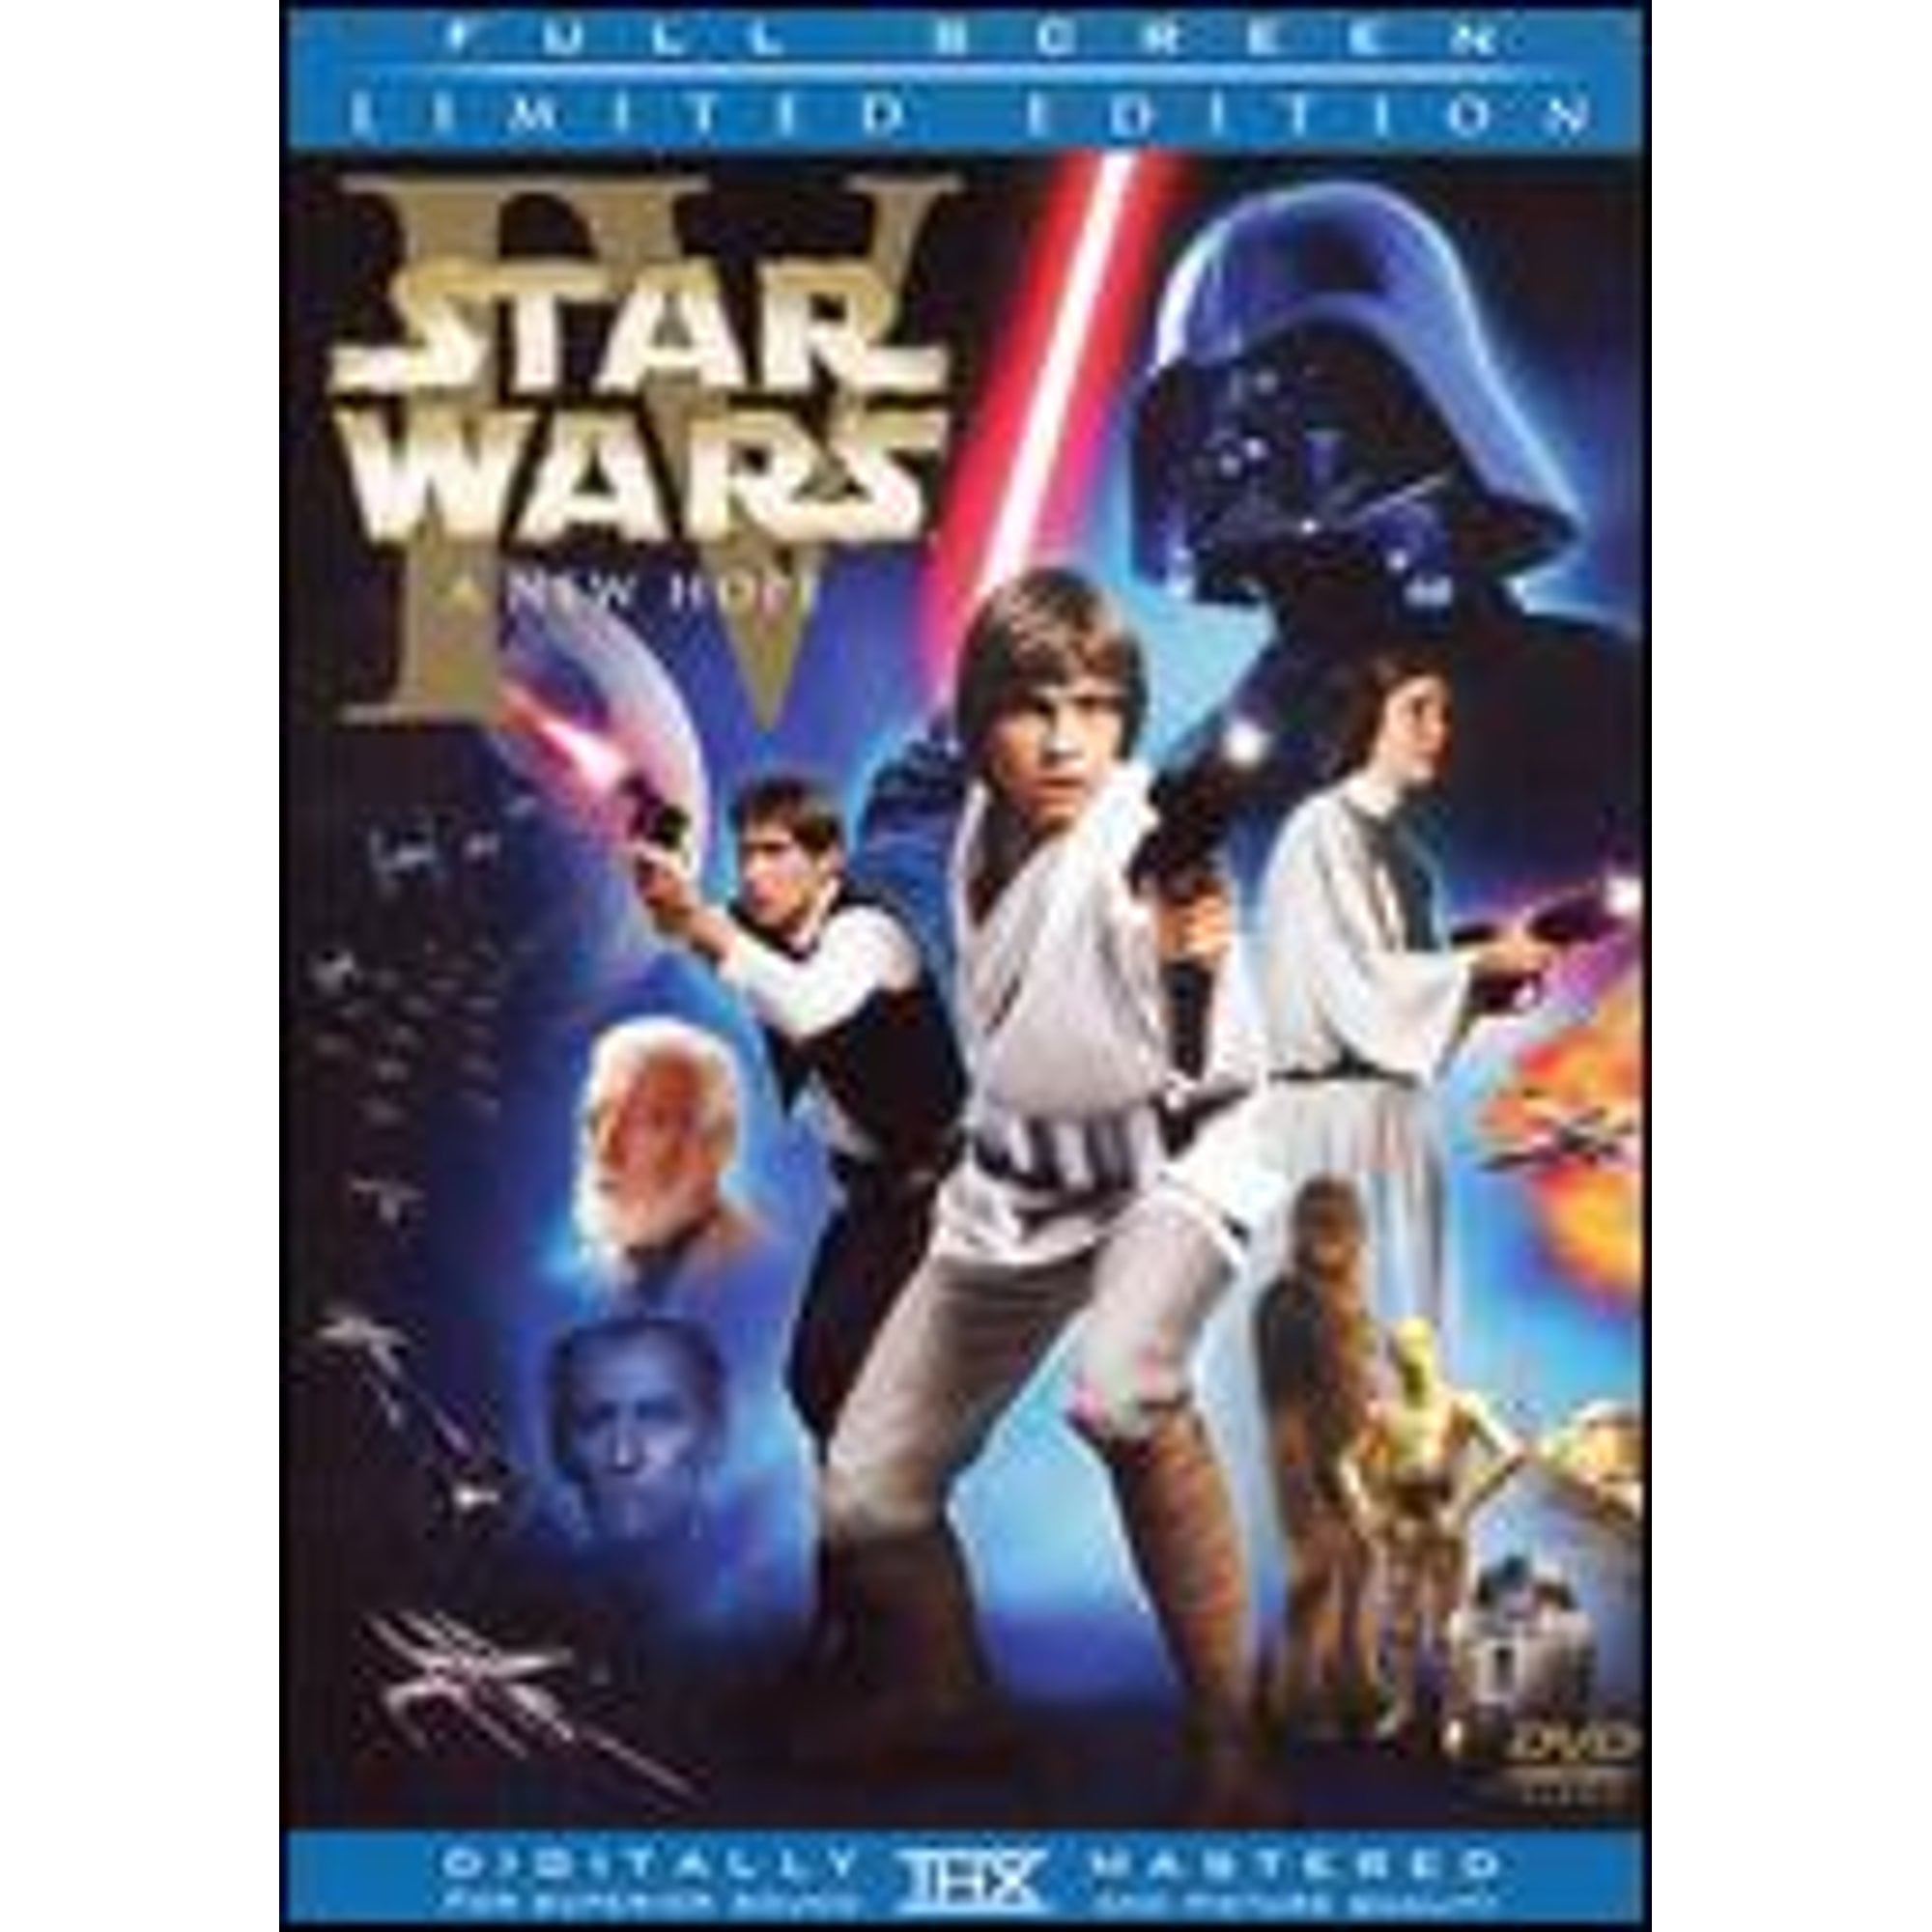 Pre-Owned Star Wars: Episode IV: A New Hope [1977 & 1997 Versions] [P&S] ( DVD 0024543263784) directed by George Lucas 